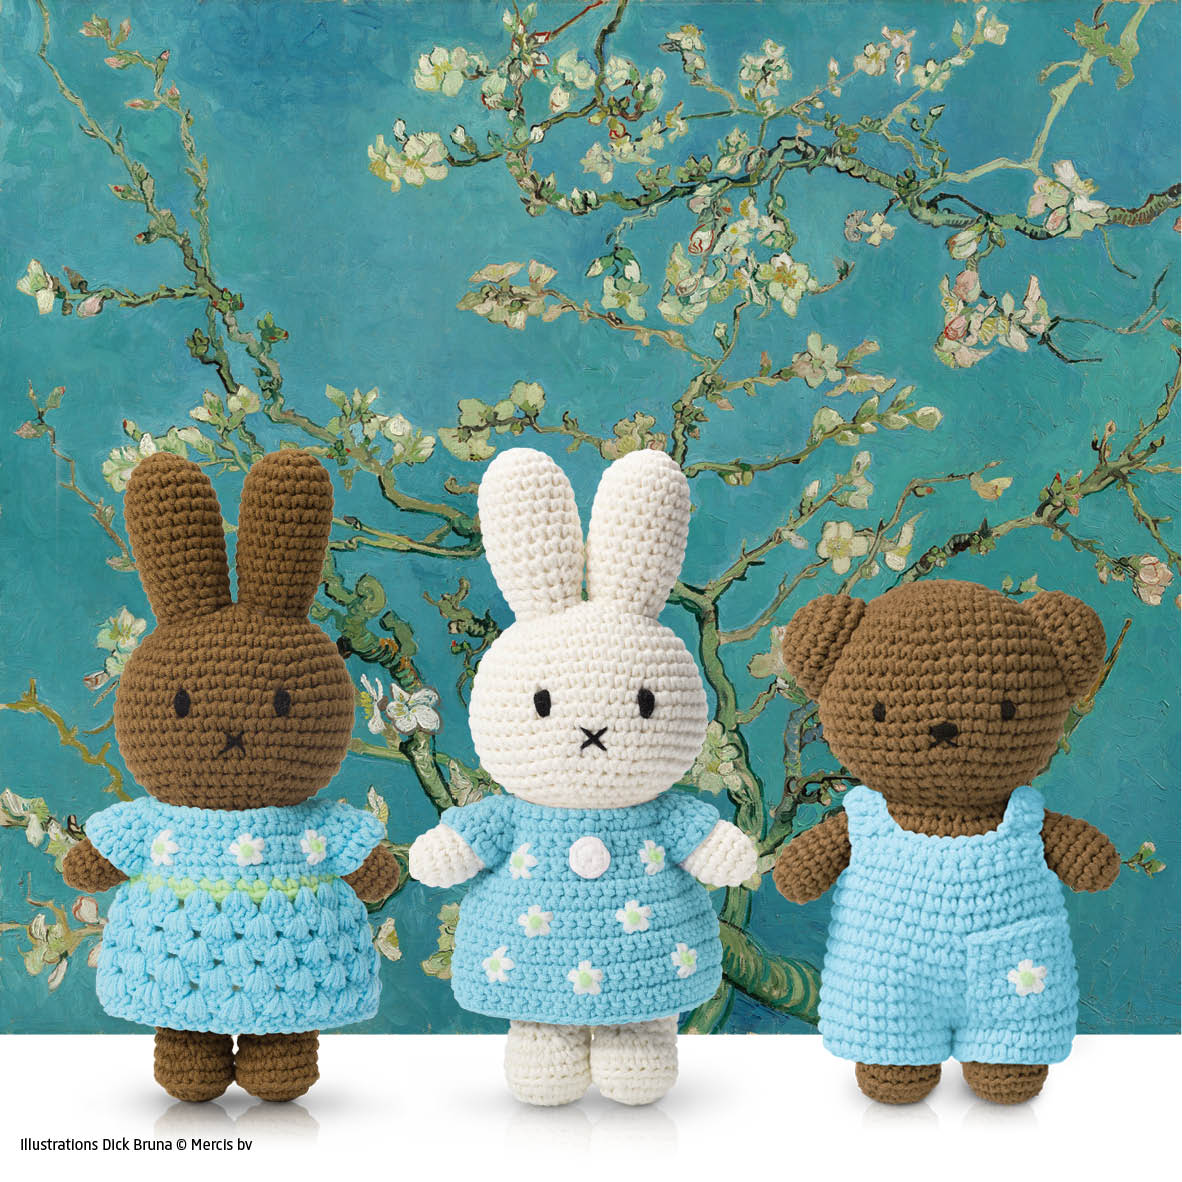 Boris Handmade Knit Doll with Van Gogh Almond Blossom-Inspired Outfit